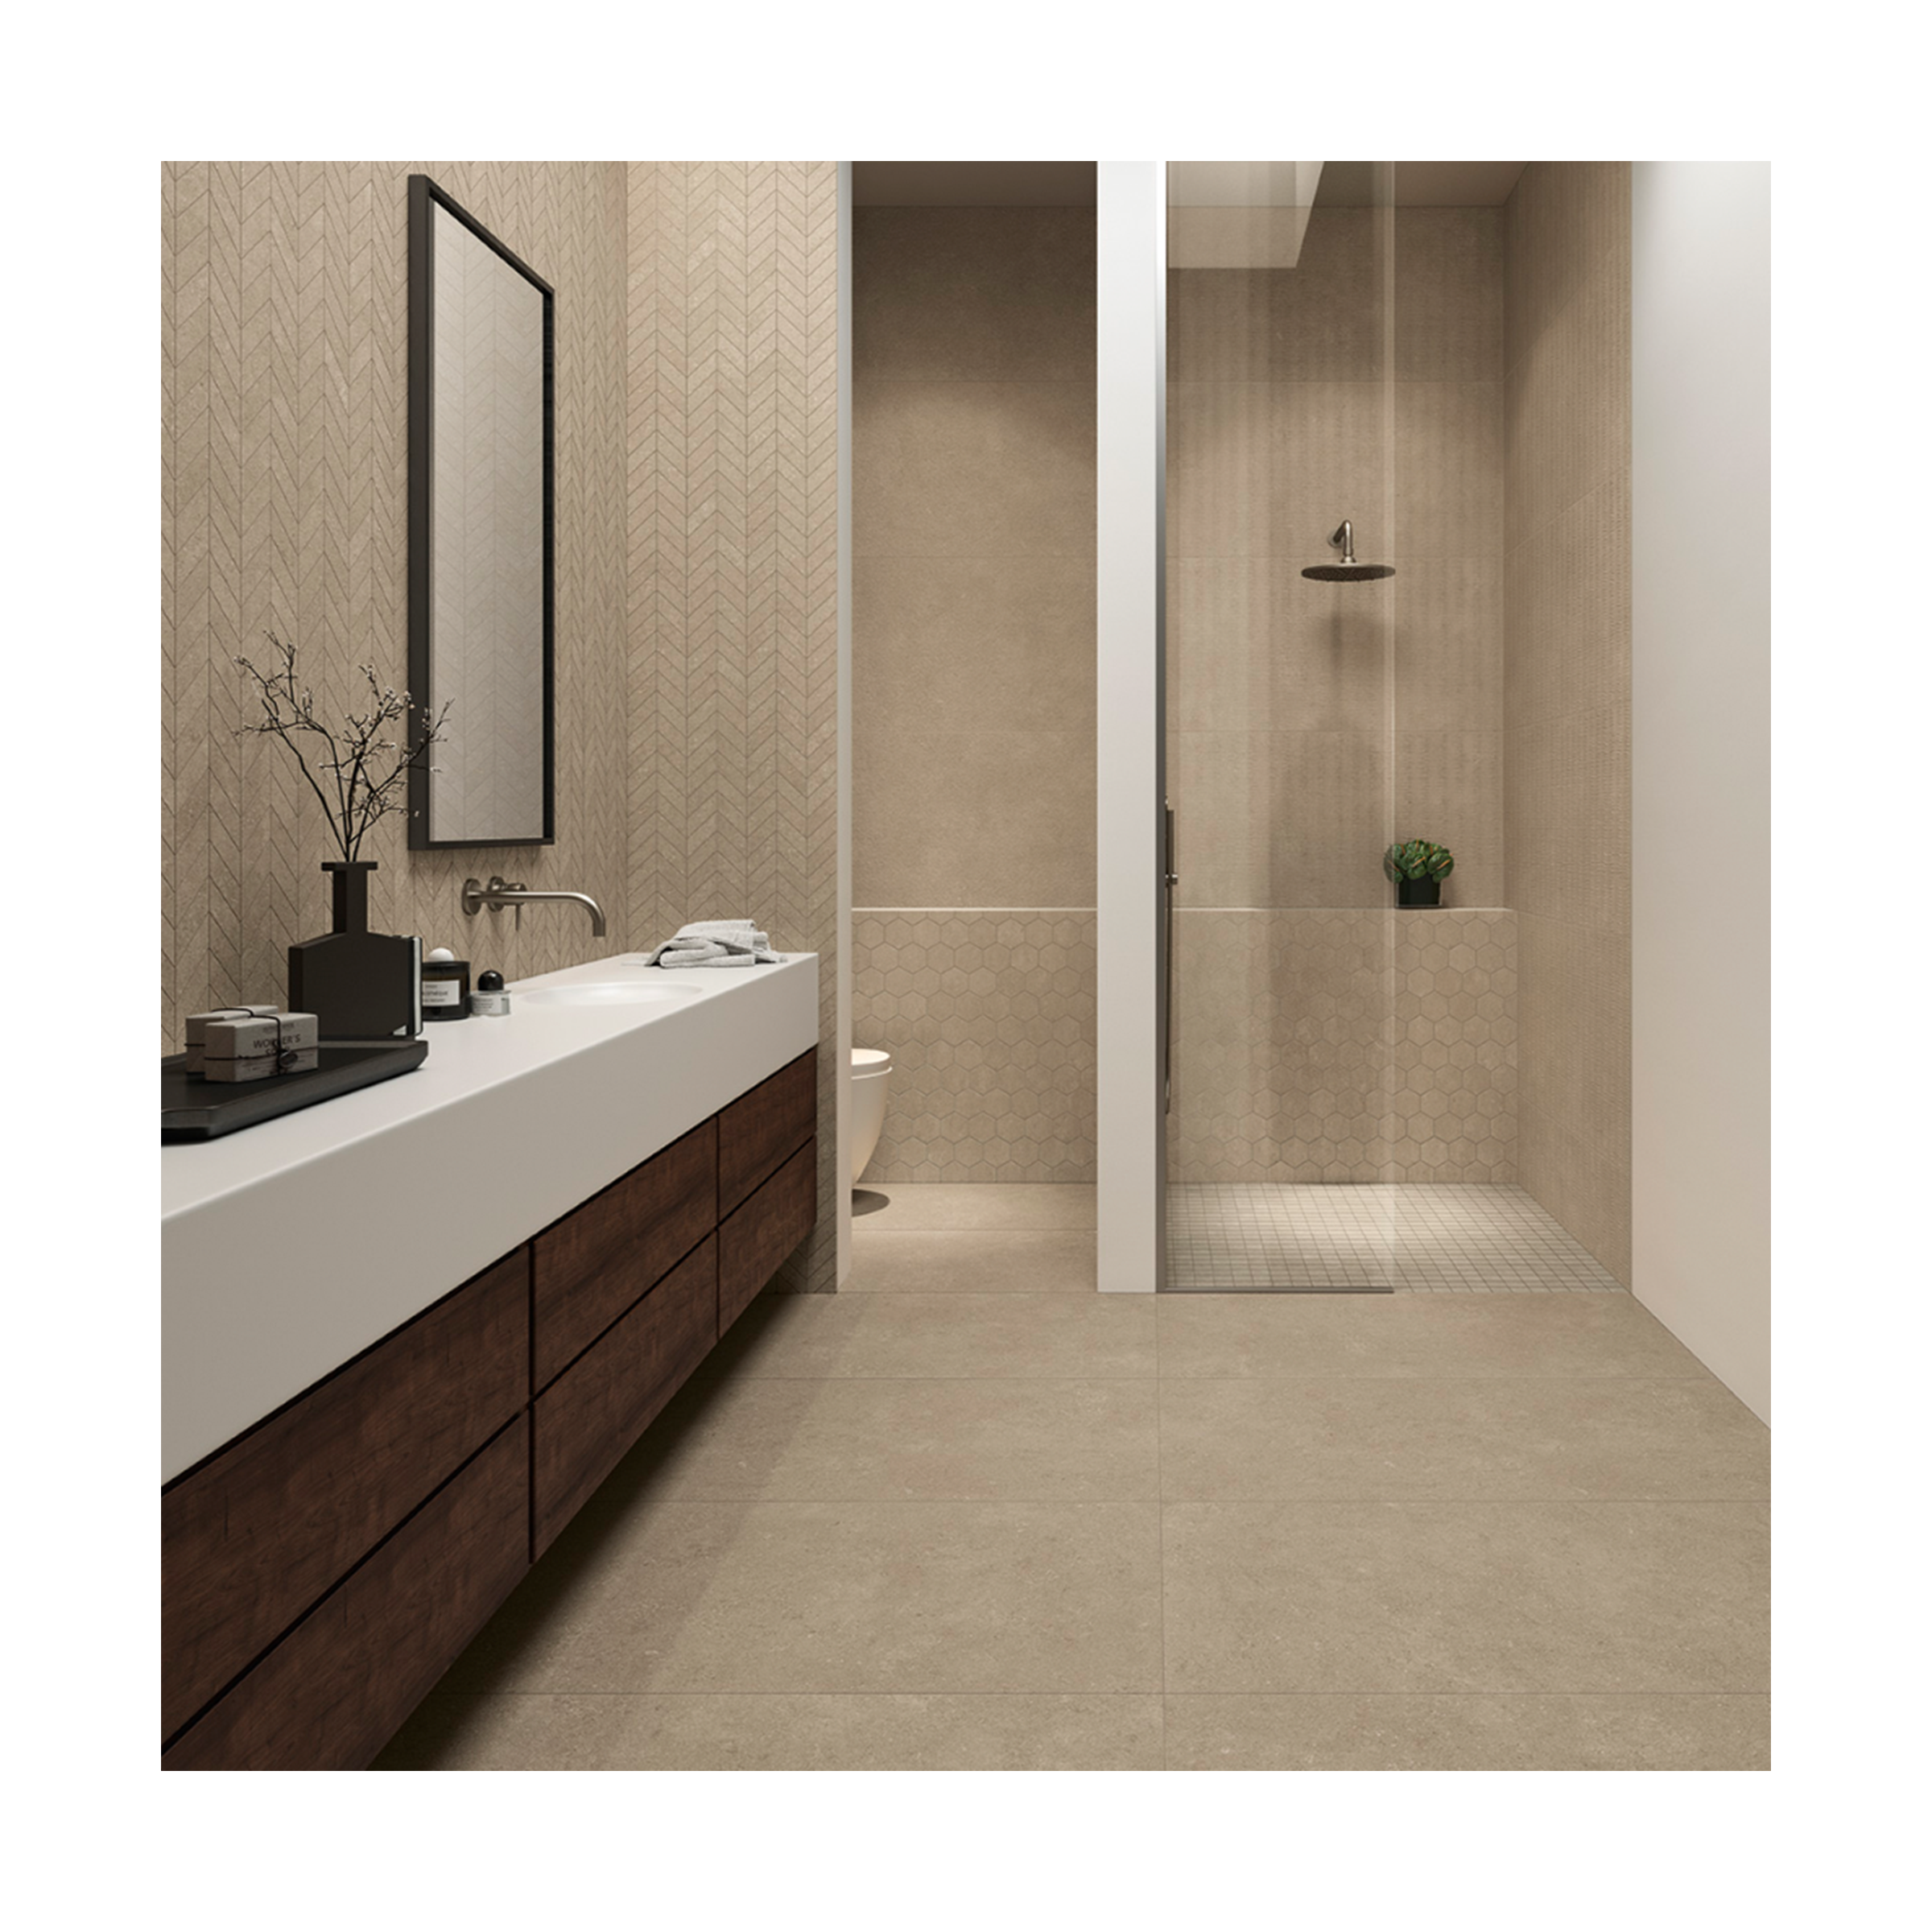 Limestone Blanched Almond Rectified Porcelain Tile 12x24